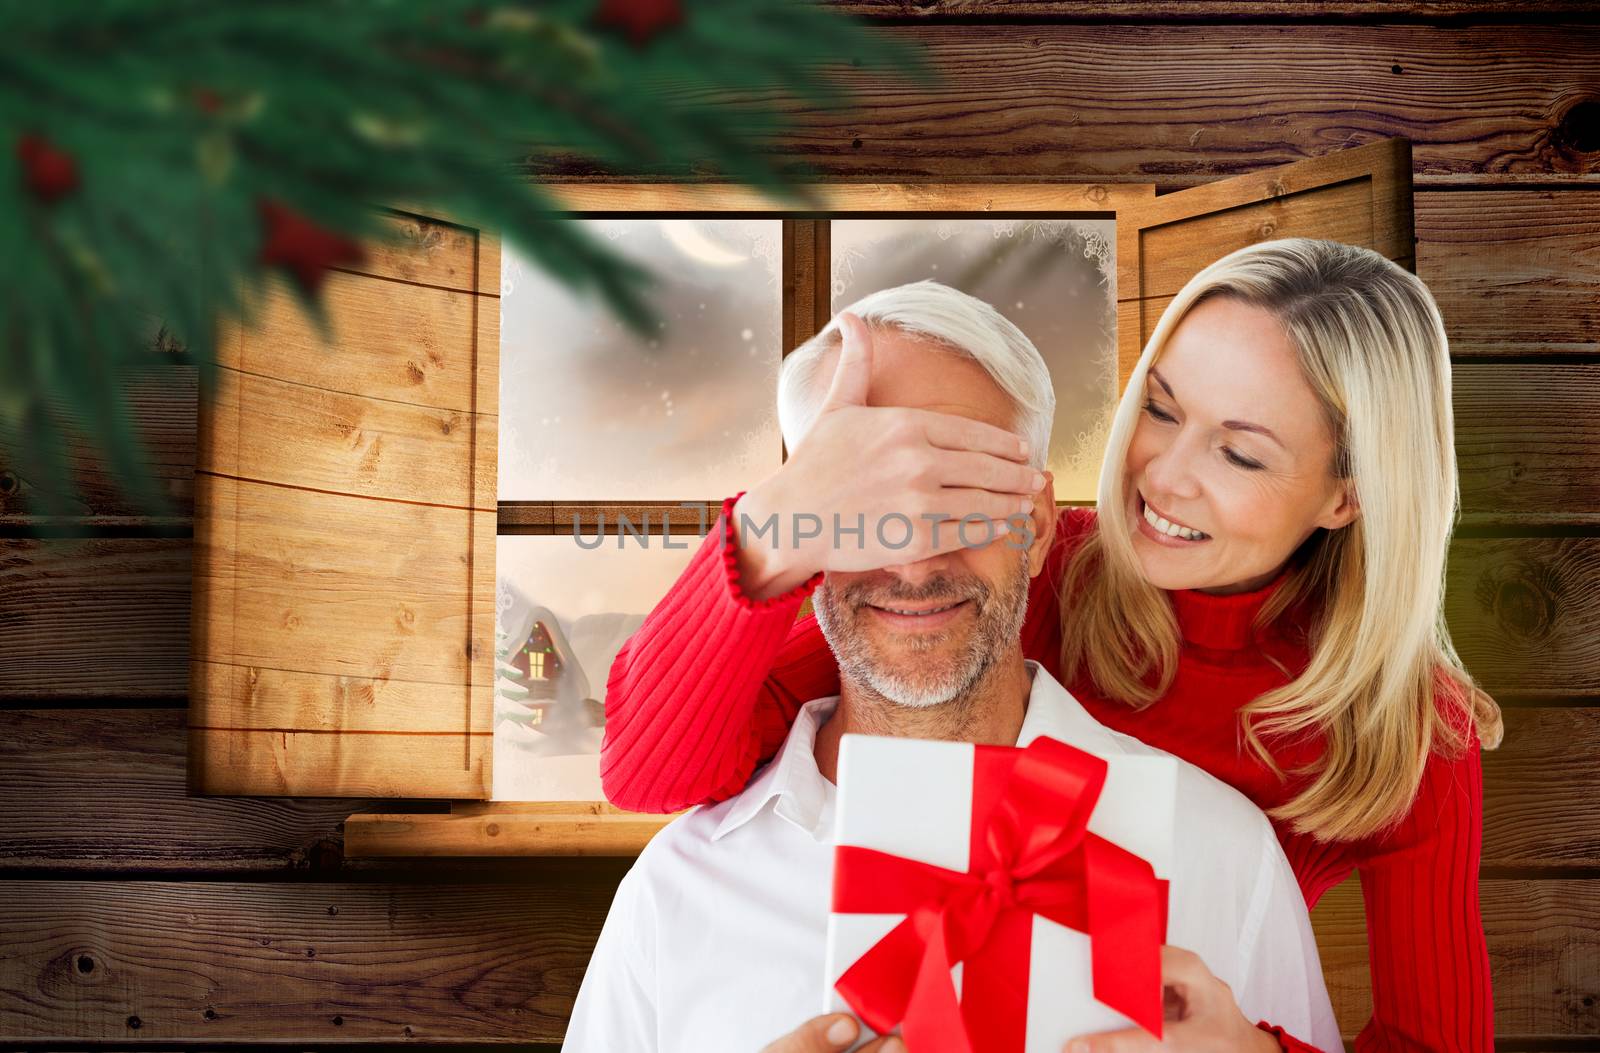 Loving couple with gift against festive fir branch with baubles 